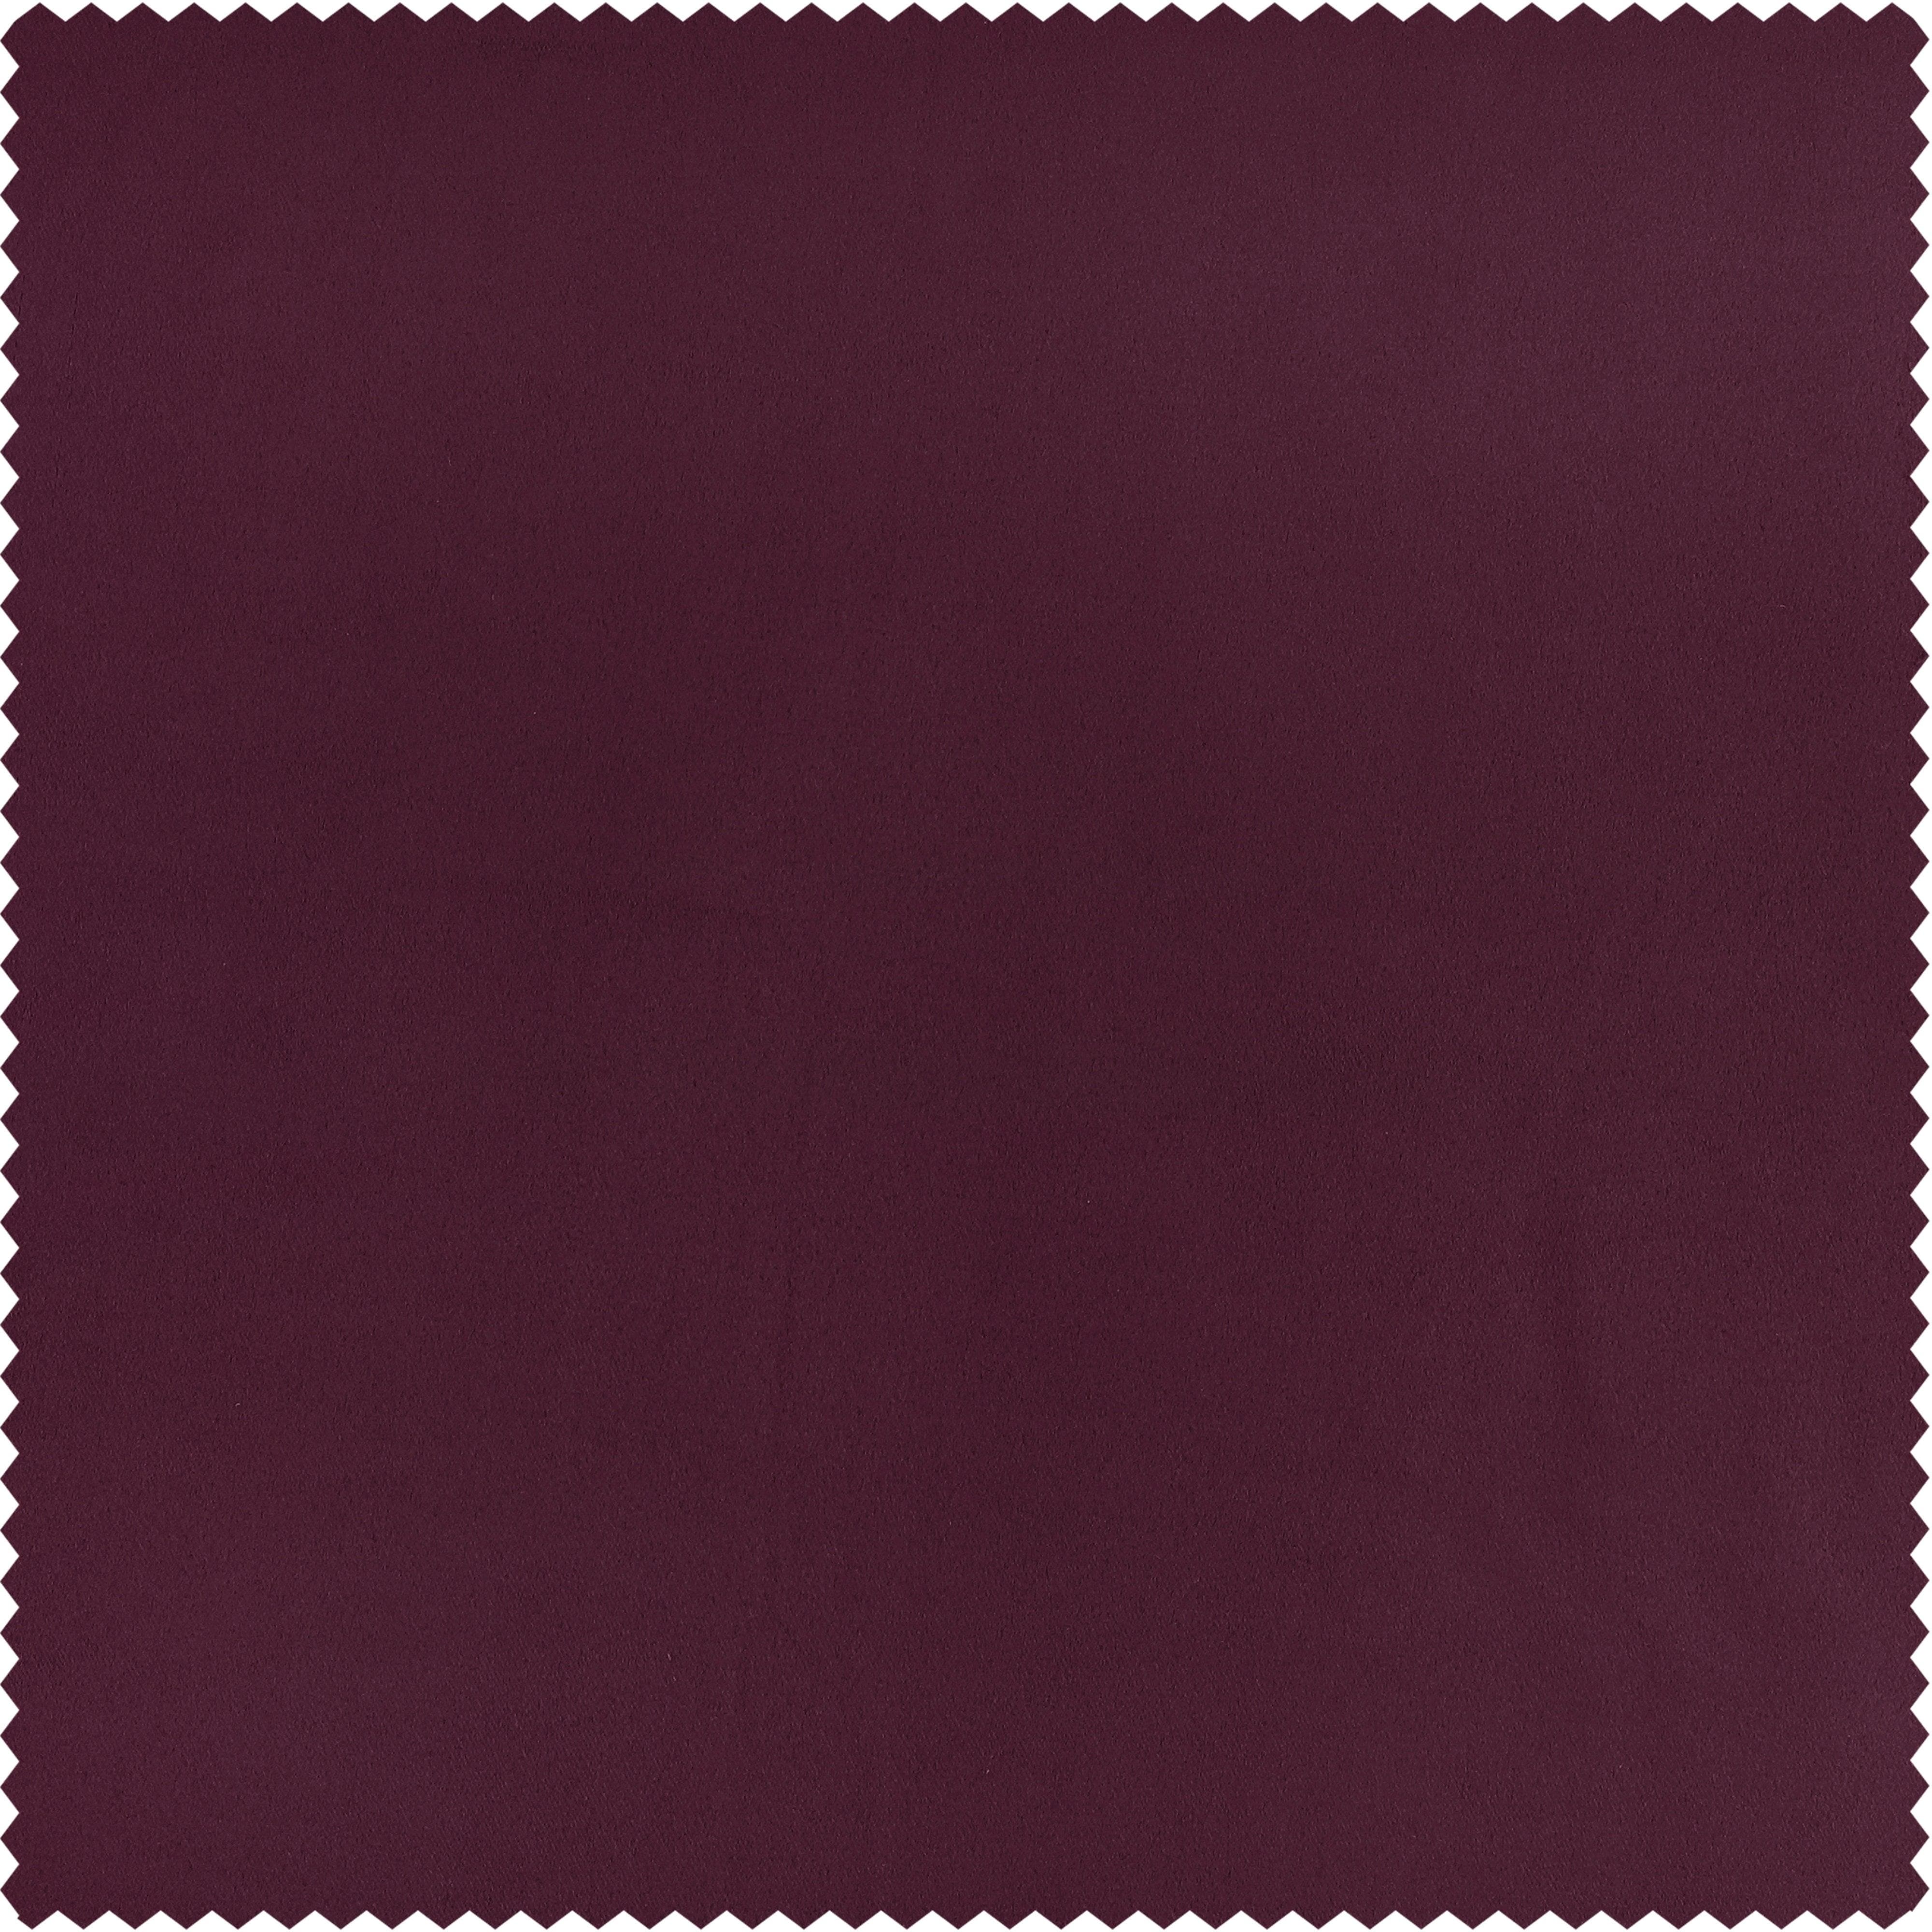 Aubergine Solid Polyester Swatch